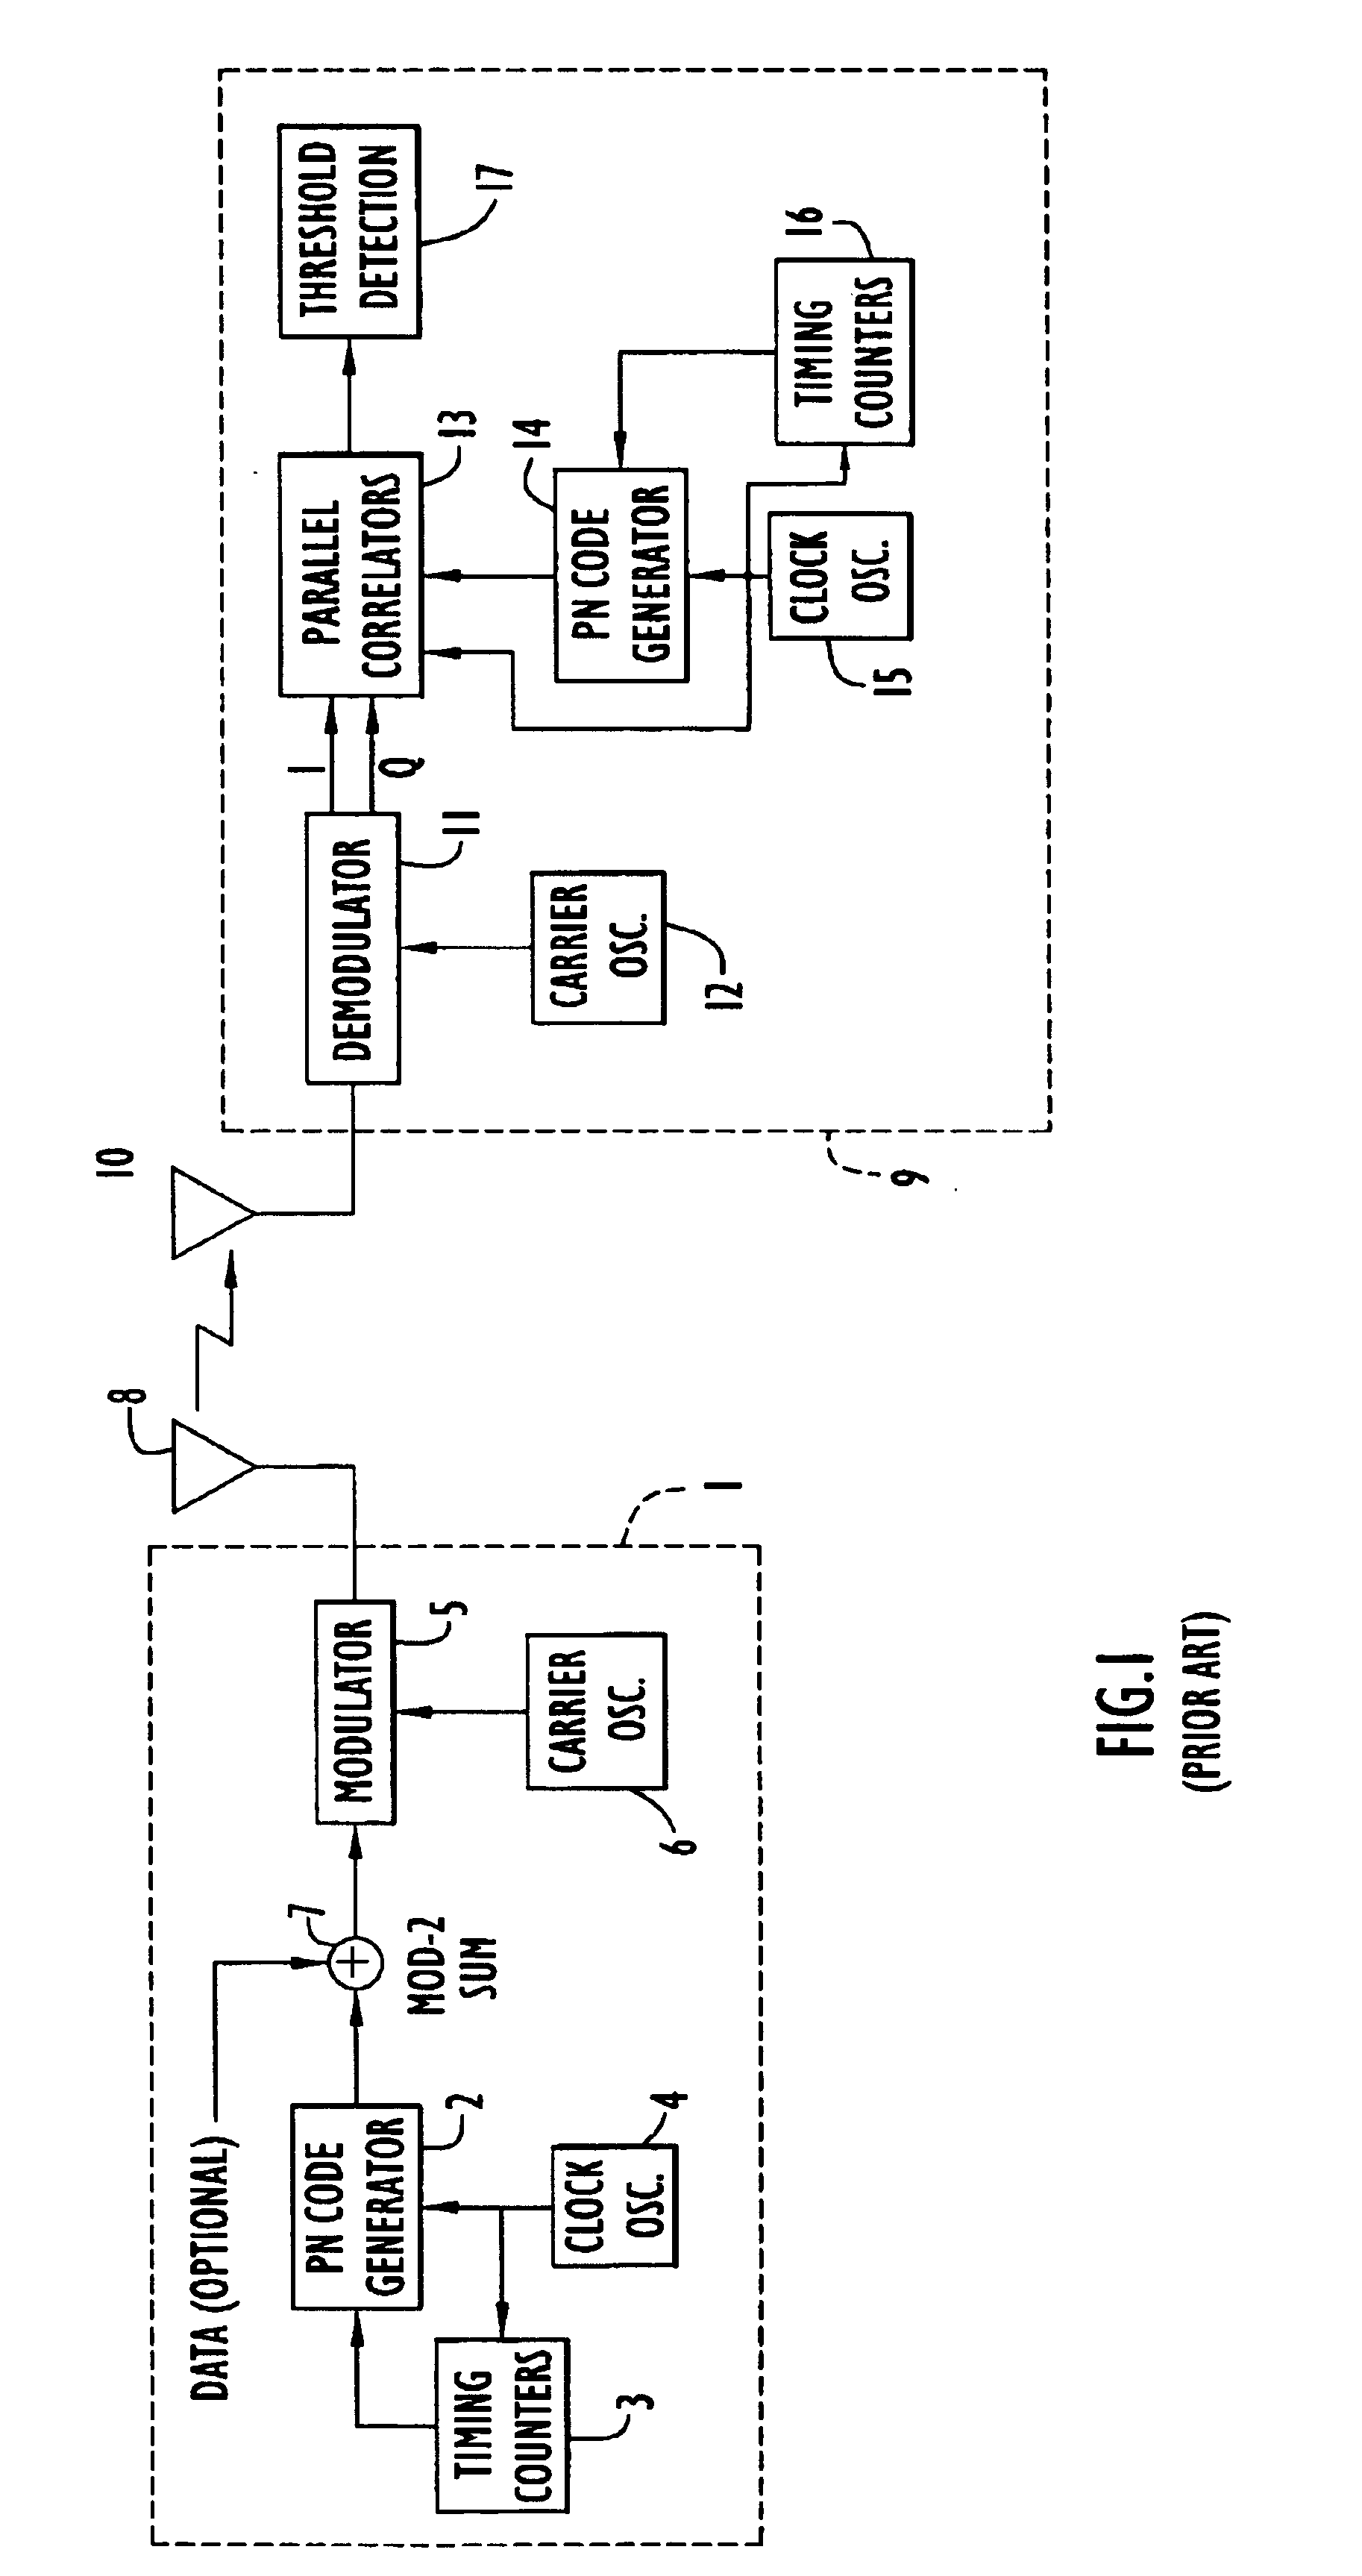 Method and apparatus for generating and transmitting a stationary dither code